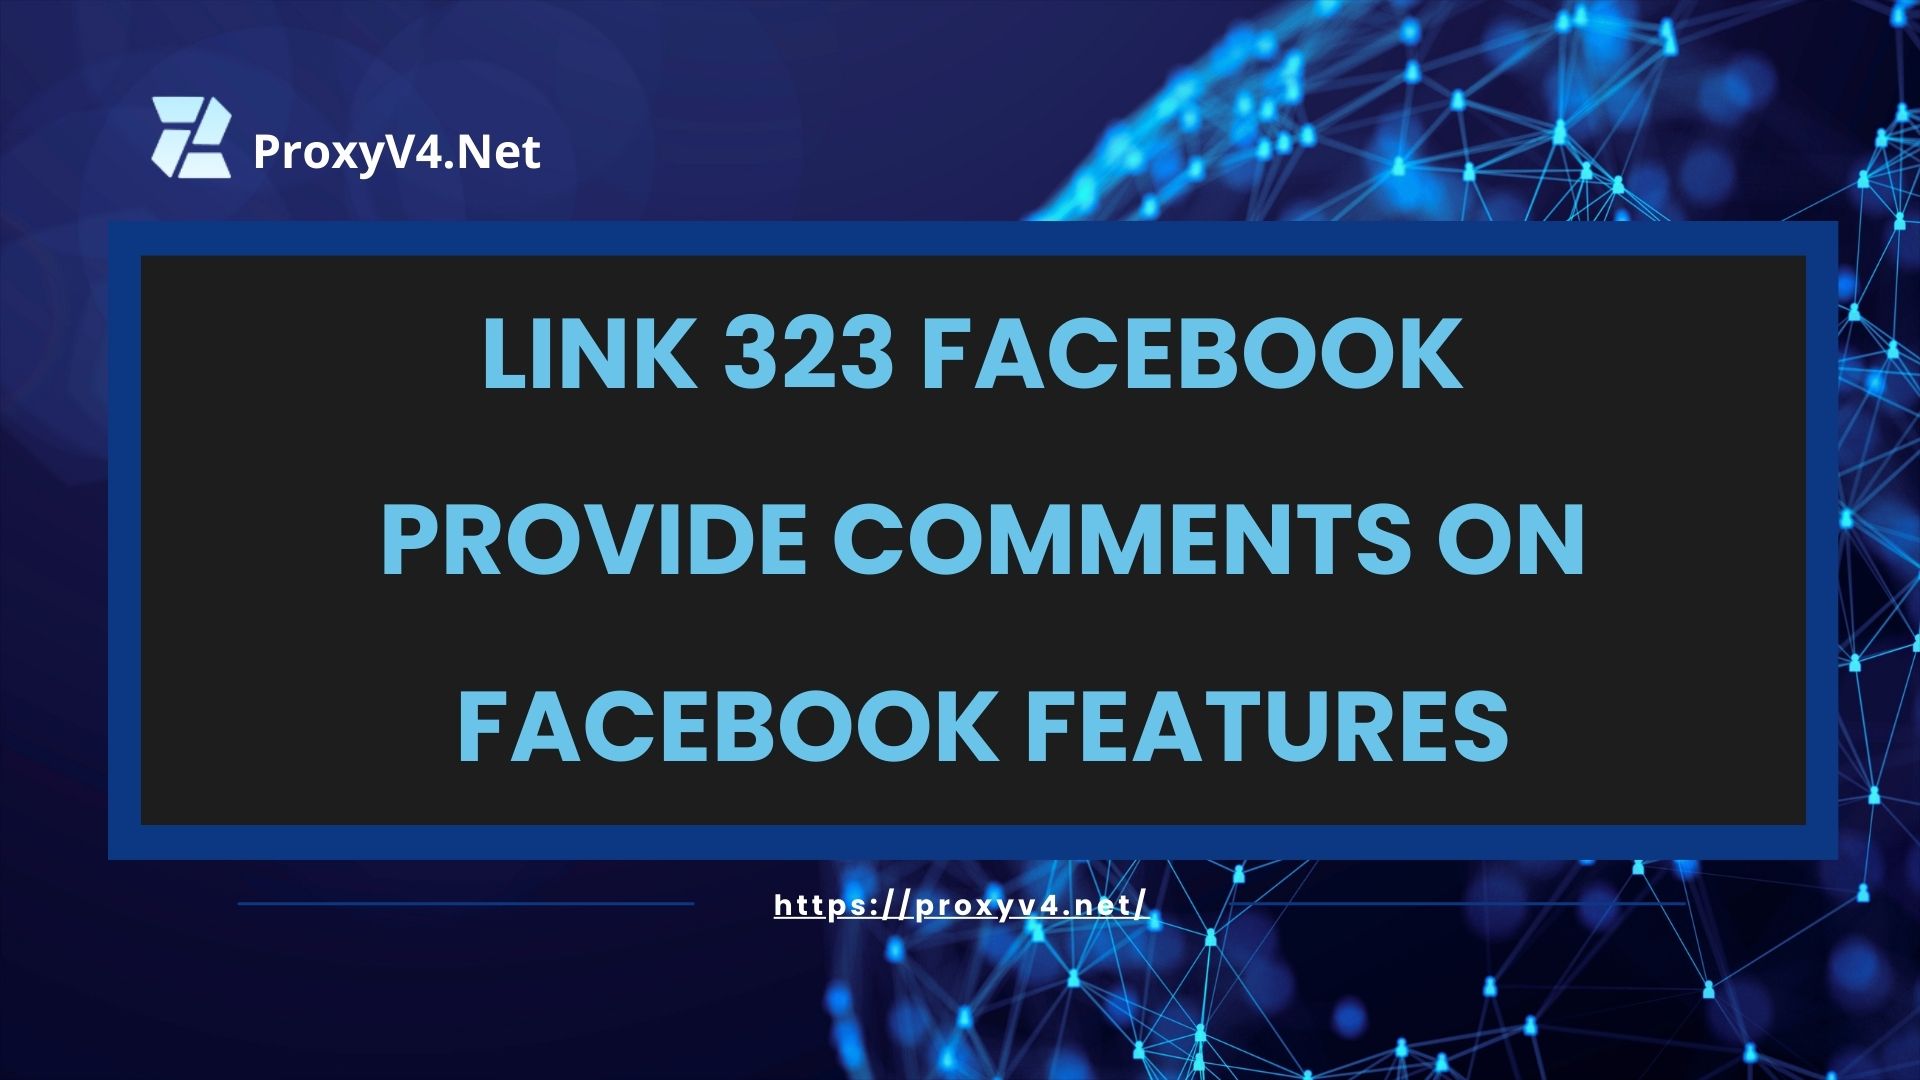 Link 323 Facebook – Provide comments on Facebook features